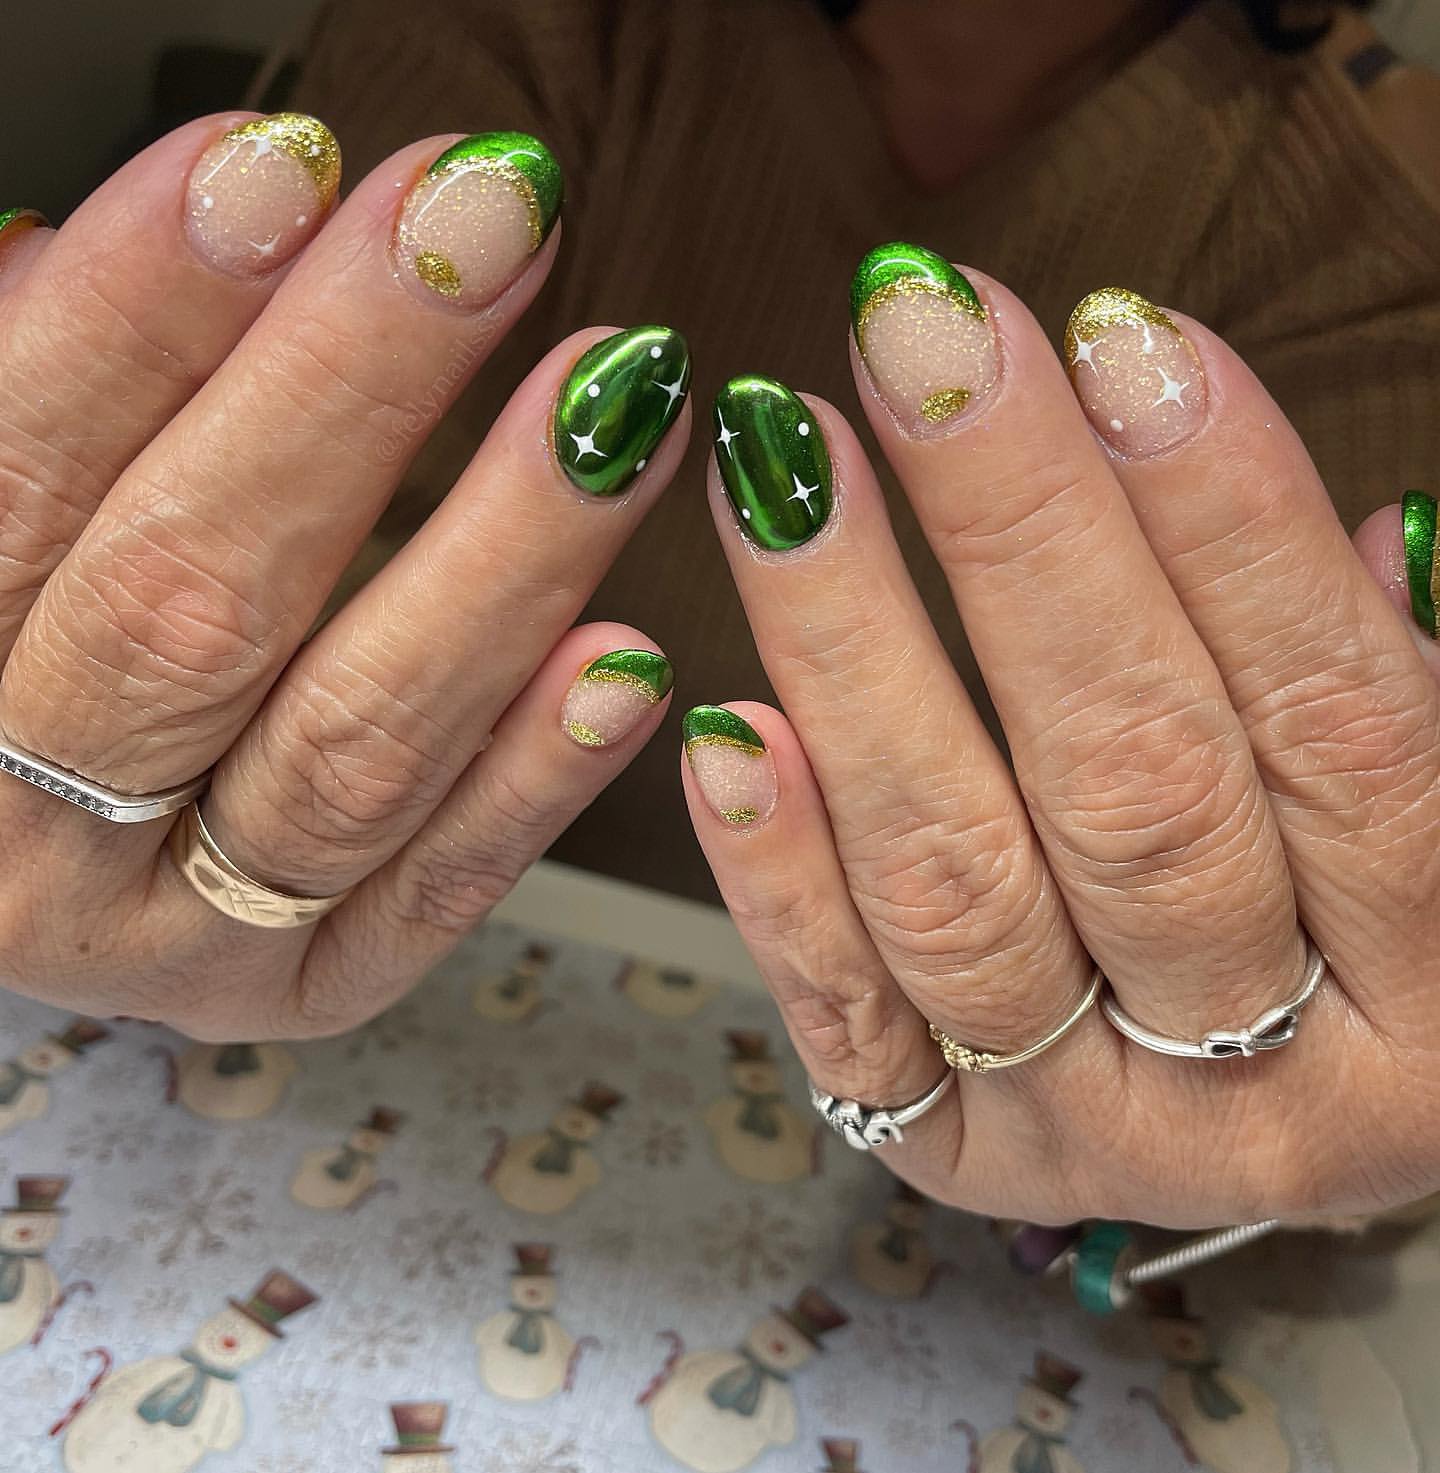 Neon Green Christmas Nails Adorned with Gold Glitters
